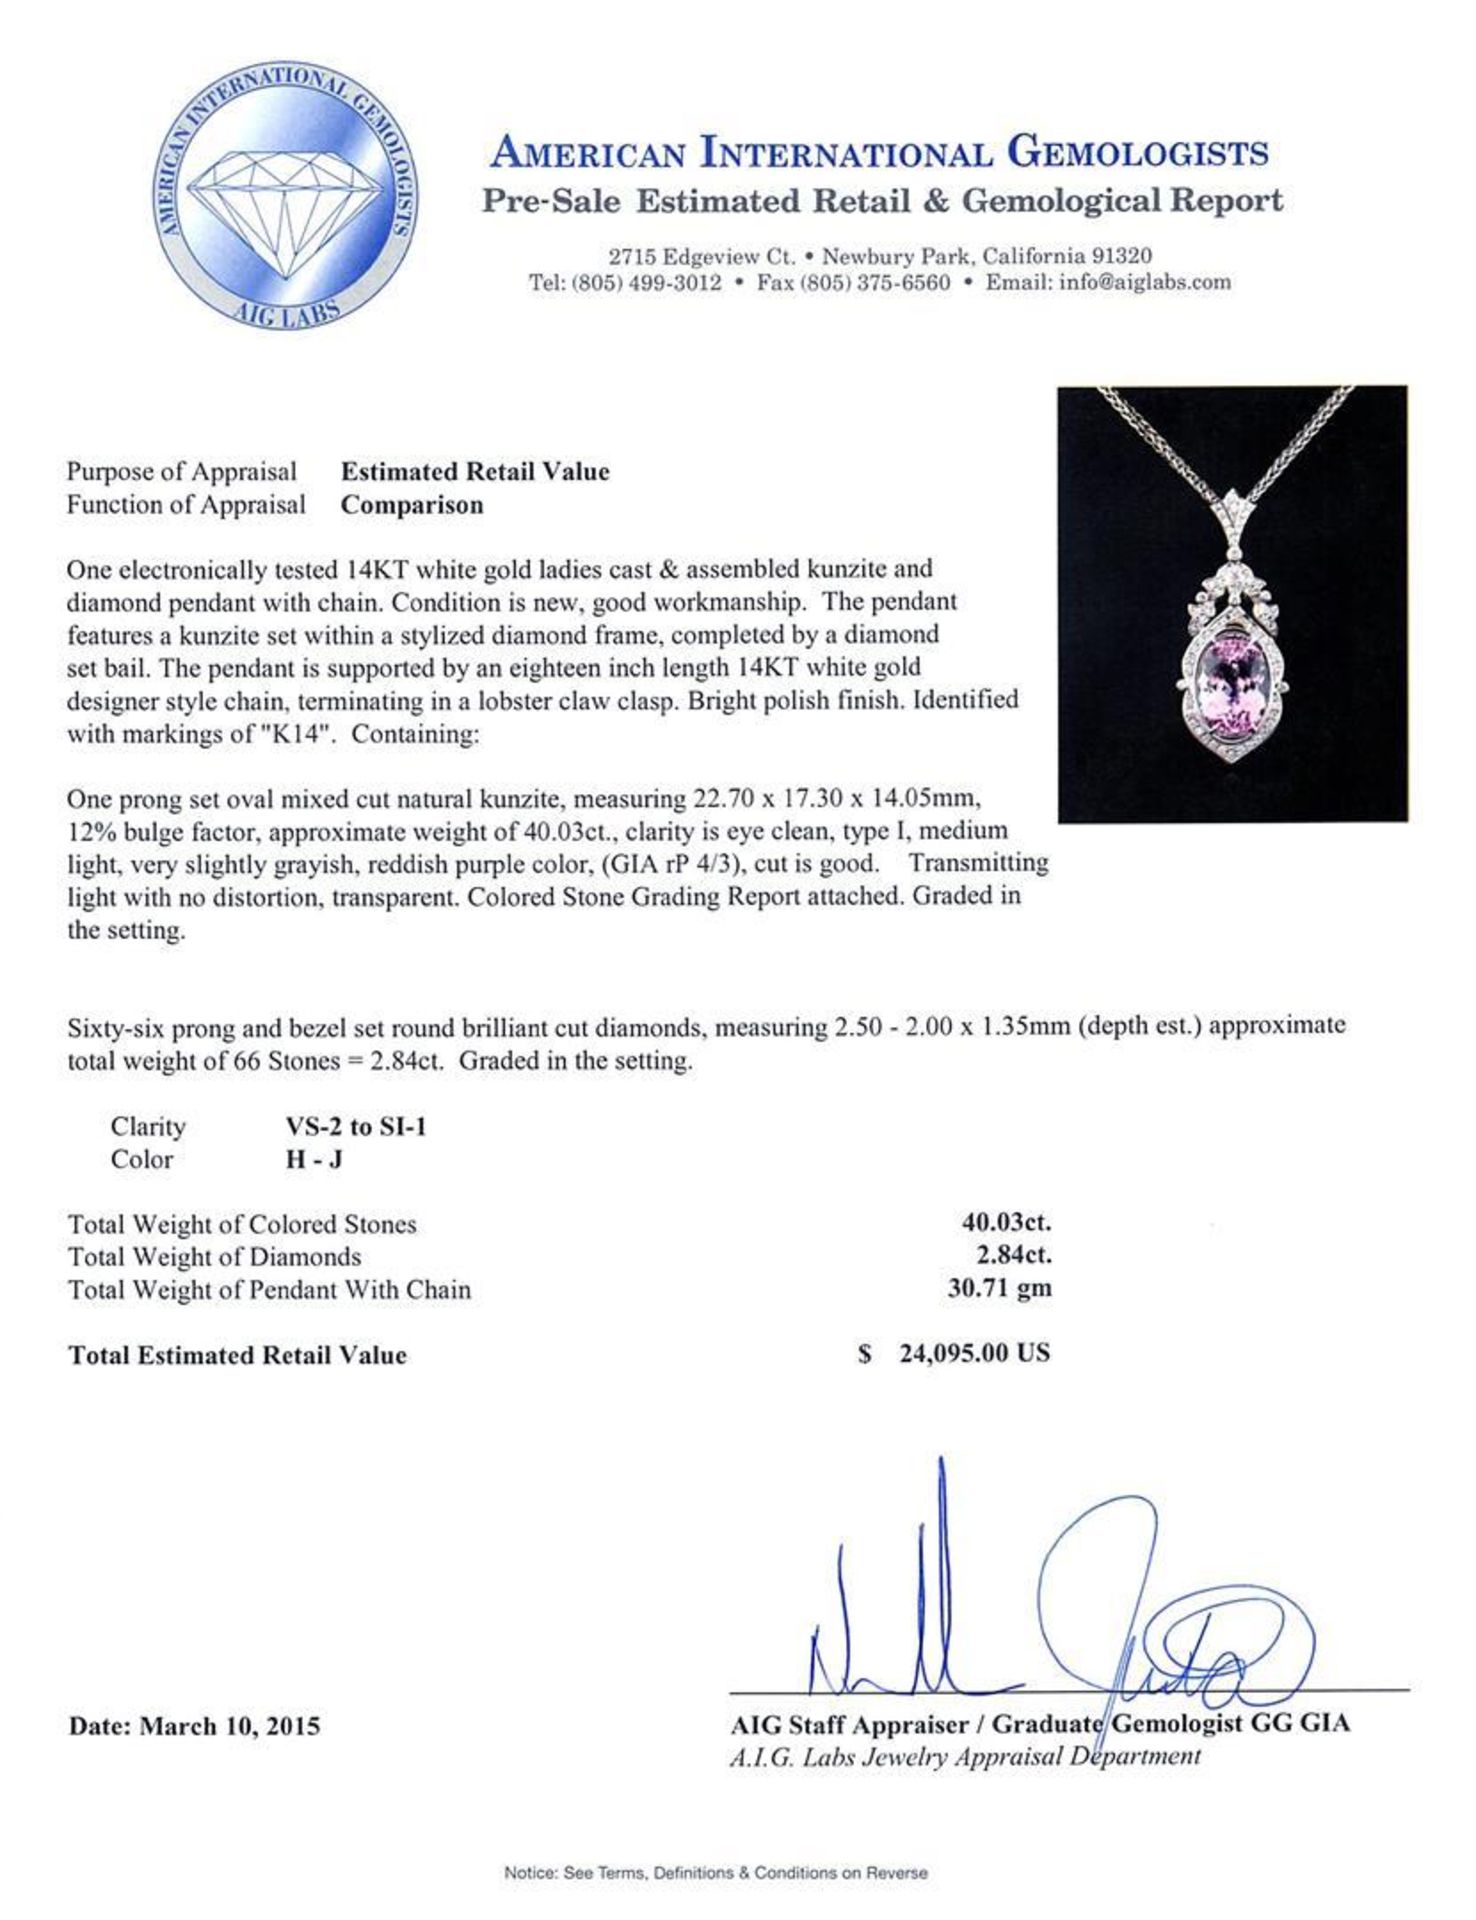 14KT White Gold 40.03 ctw Kunzite and Diamond Pendant With Chain - Image 3 of 4